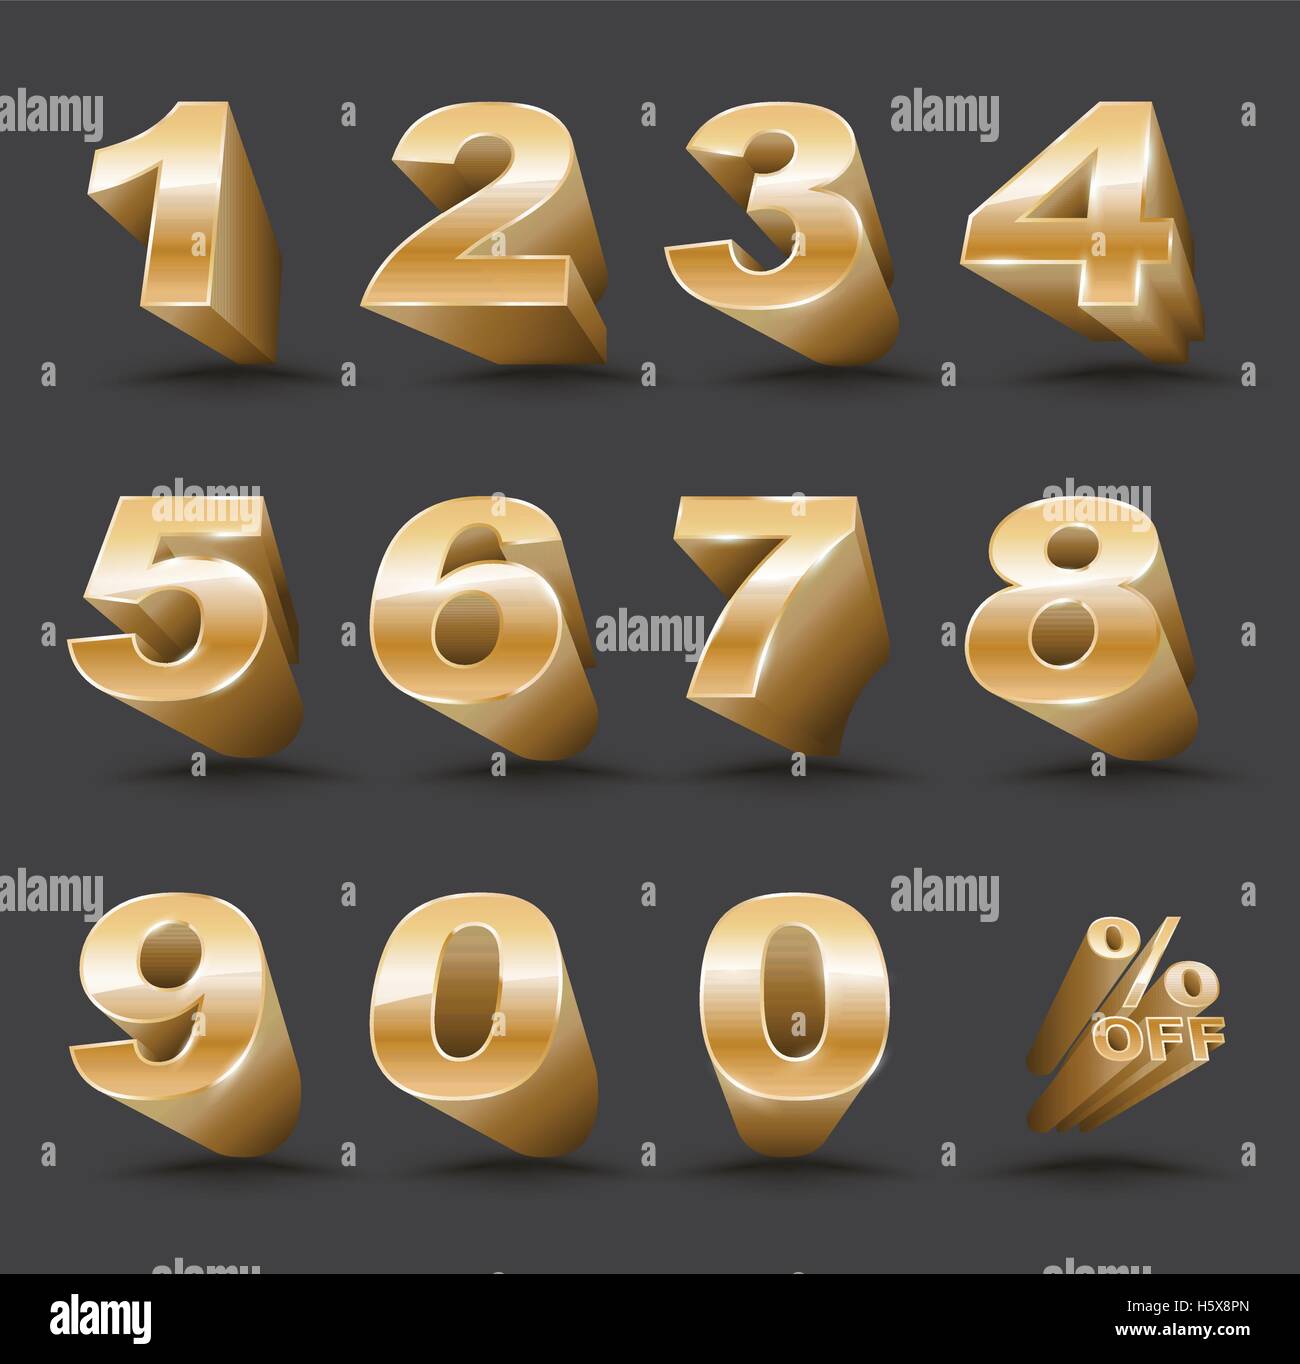 Three-dimensional number set 0-9 with percent off. Vector illustration of 3D font characters. Gold style numbers for promotion Stock Vector